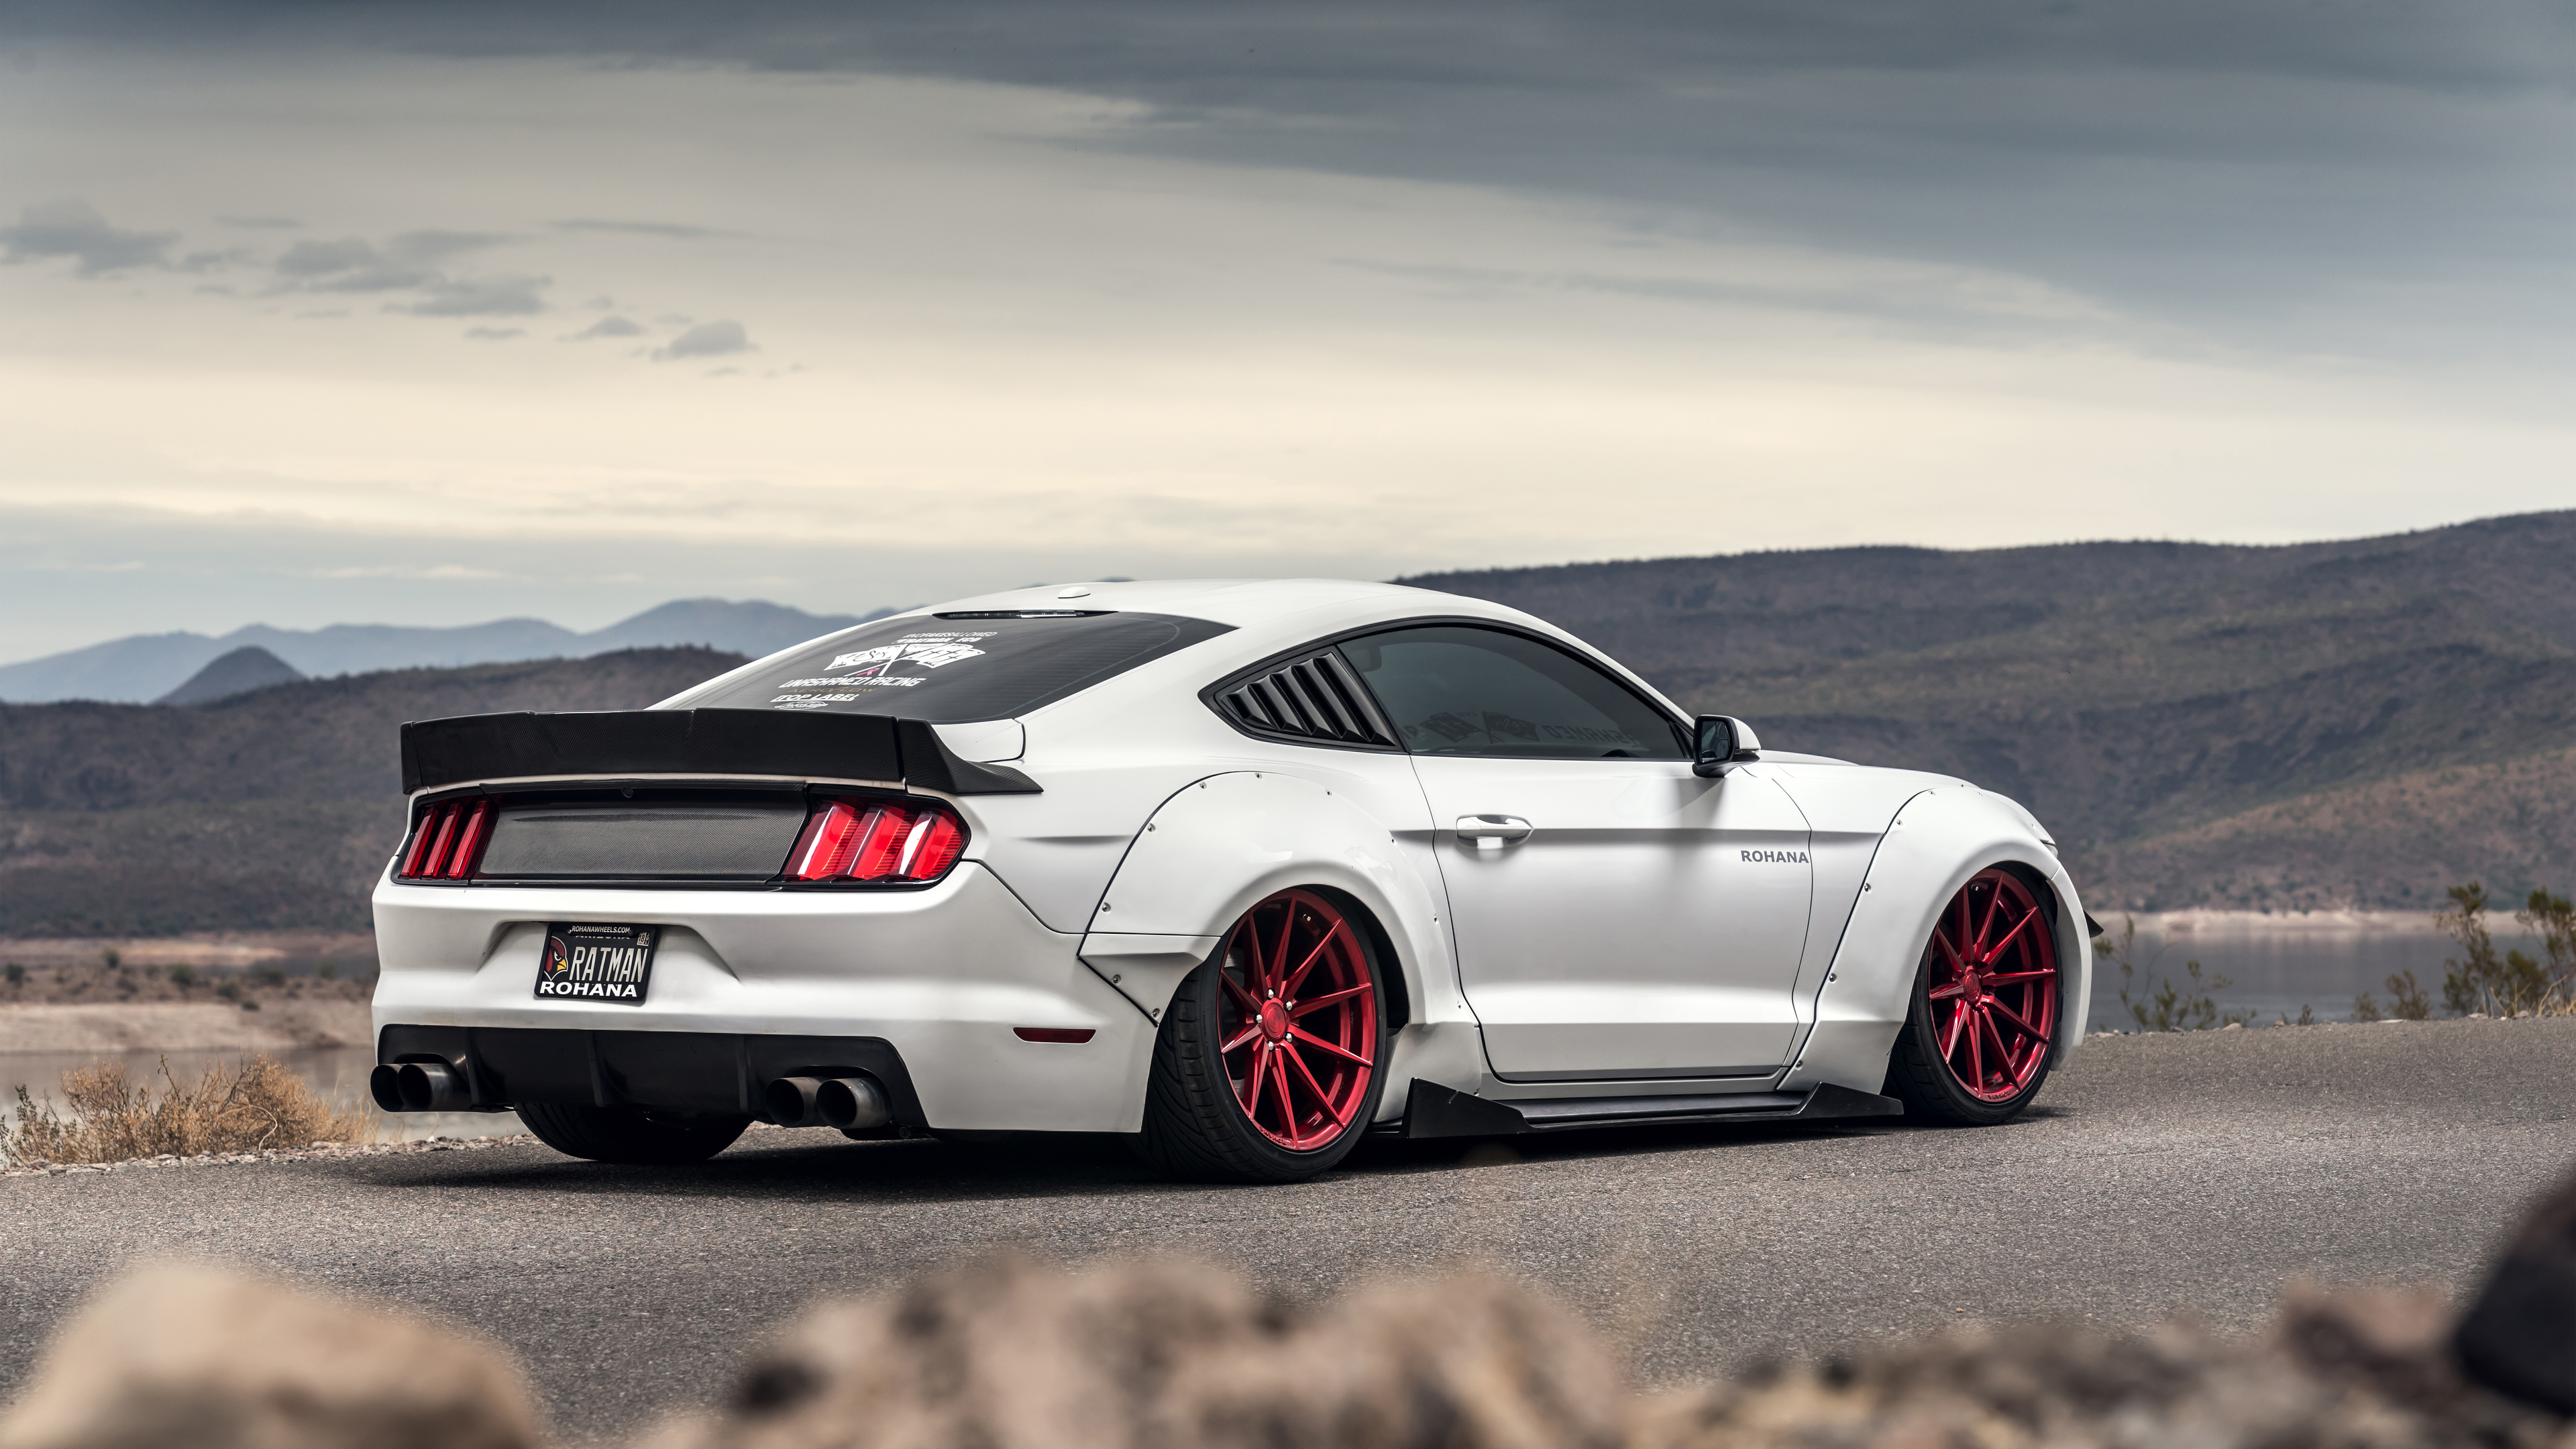 ford mustang gt 4k 1557260840 - Ford Mustang GT 4k - hd-wallpapers, ford mustang wallpapers, cars wallpapers, 4k-wallpapers